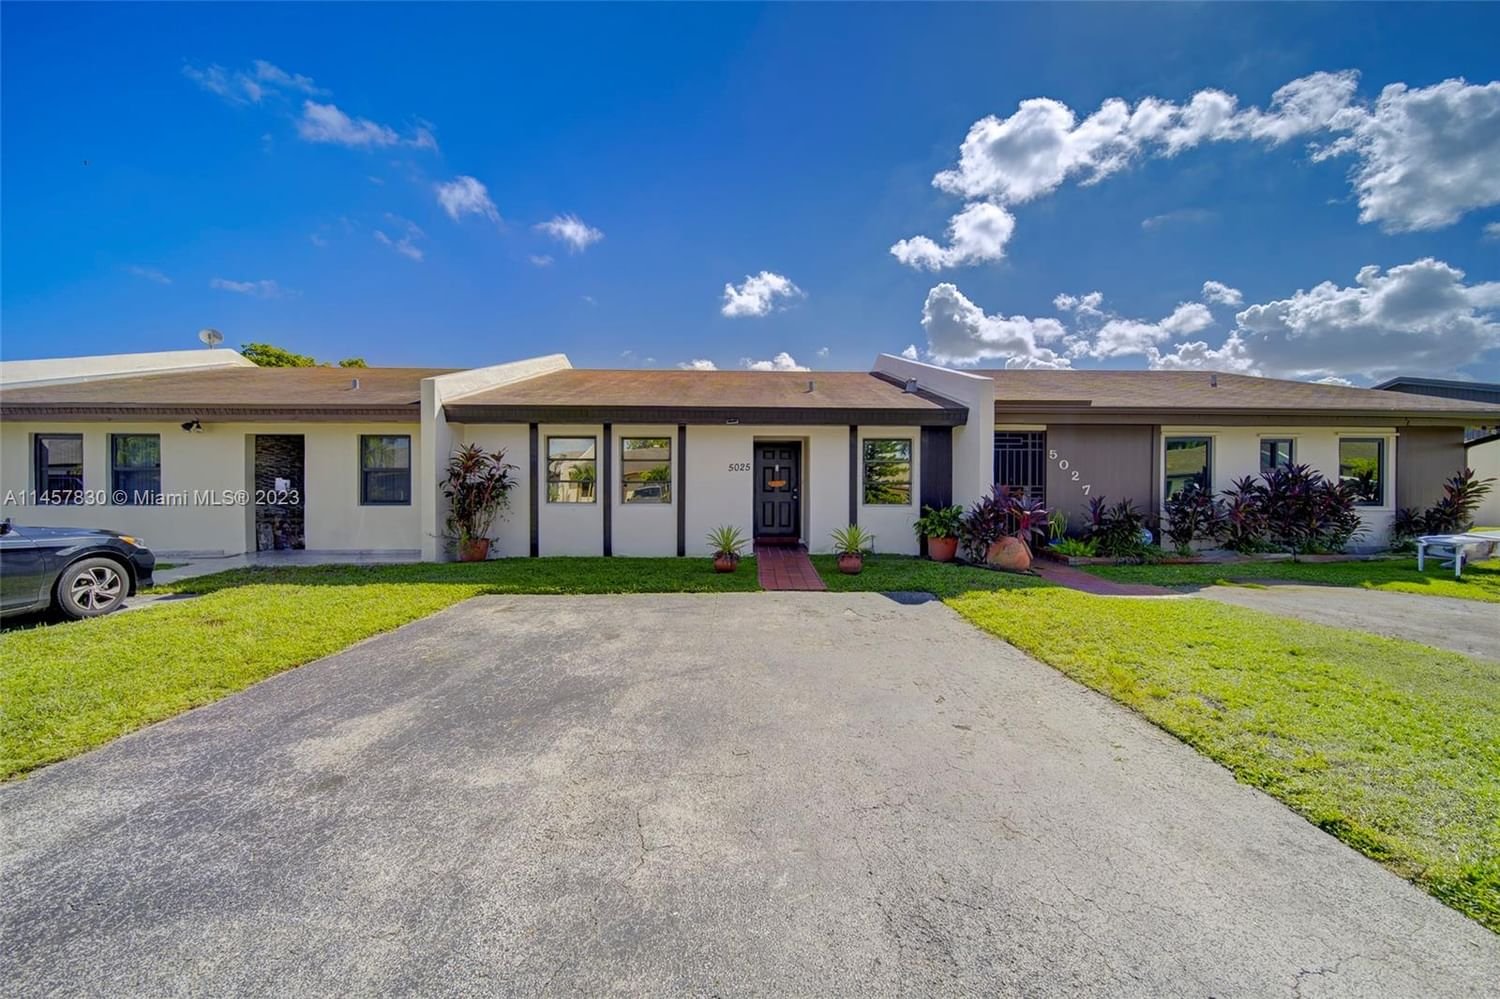 Real estate property located at 5025 139th Pl, Miami-Dade County, BENT TREE CENTER, Miami, FL